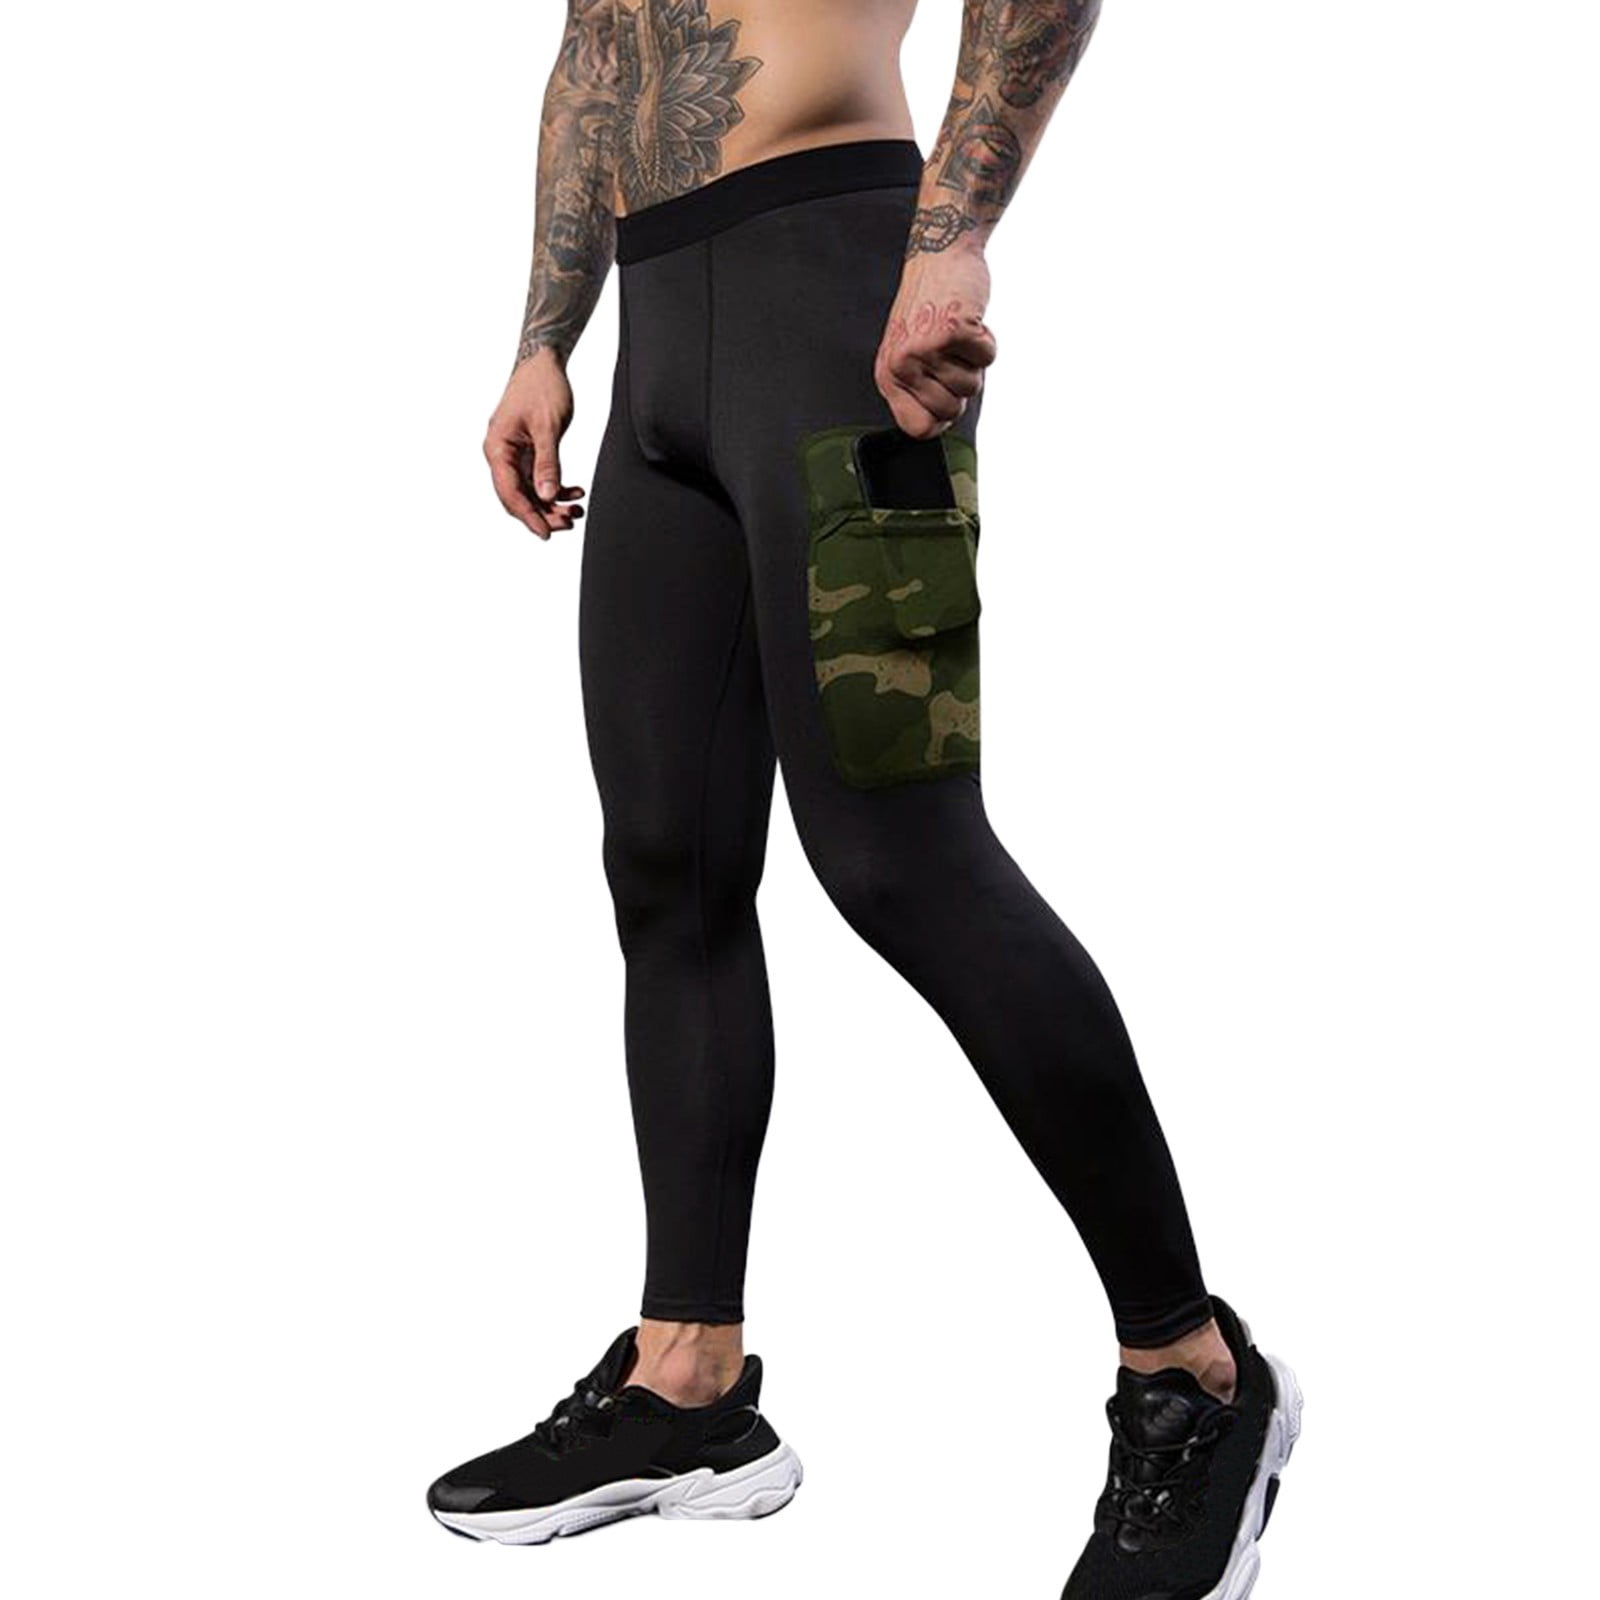 Camouflage Snow - Military Look - Runner - Yoga Pants - Leggings - Fit –  BEST WEAR - See Through Shirts - Sheer Nylon Tops - Second Skin -  Transparent Pantyhose - Tights - Plus Size - Women Men